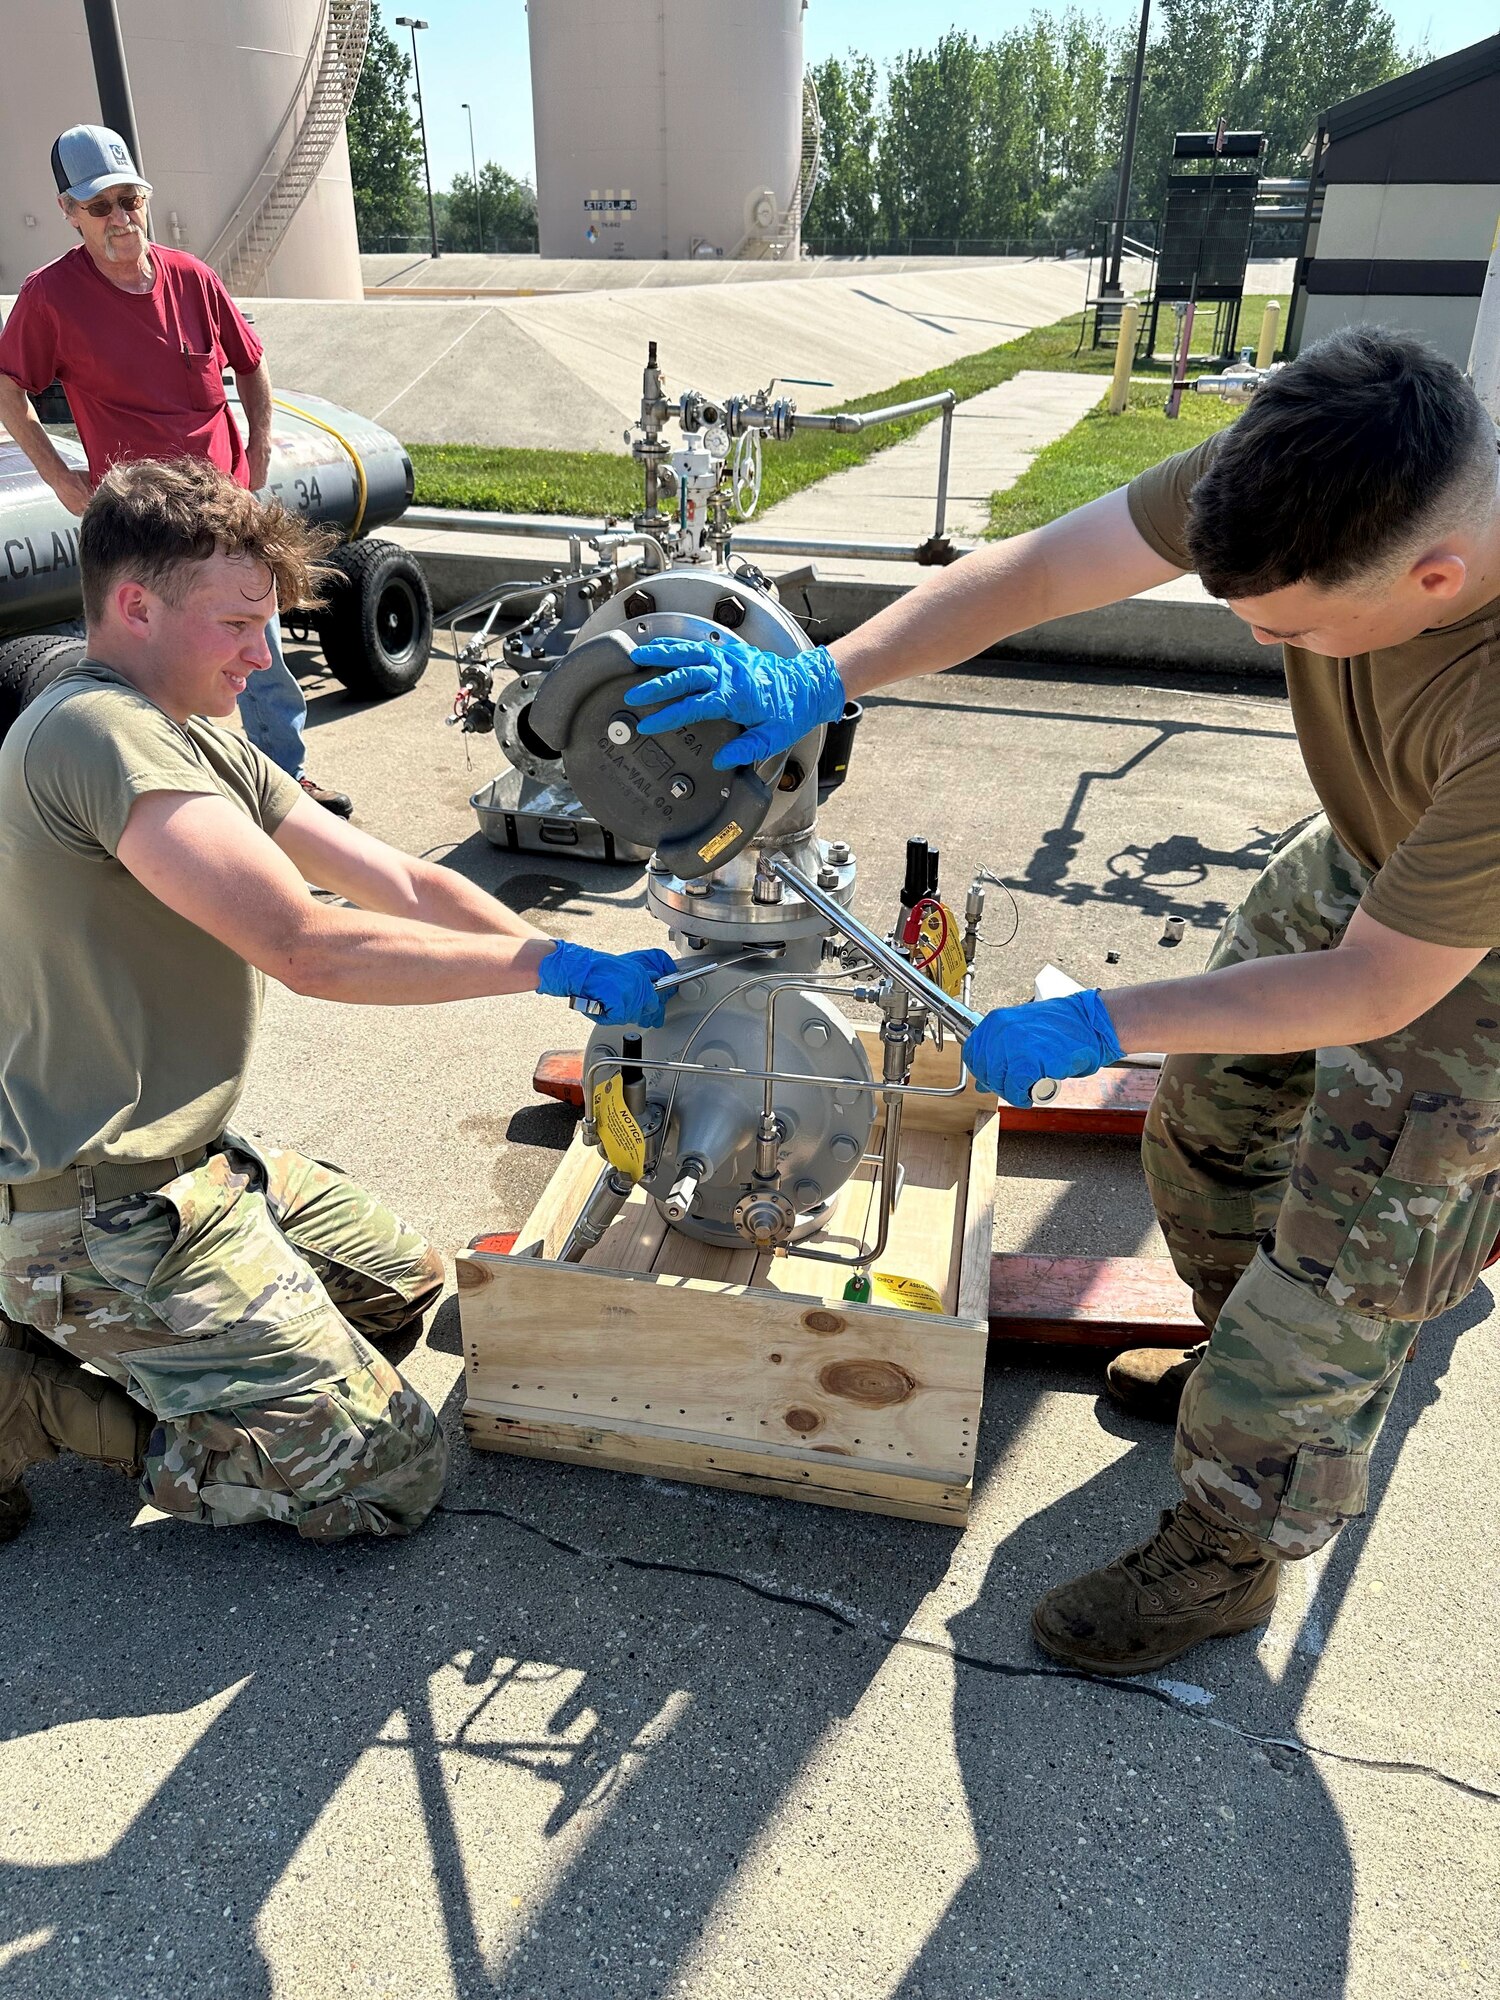 2 service members work on a hydrant valve.